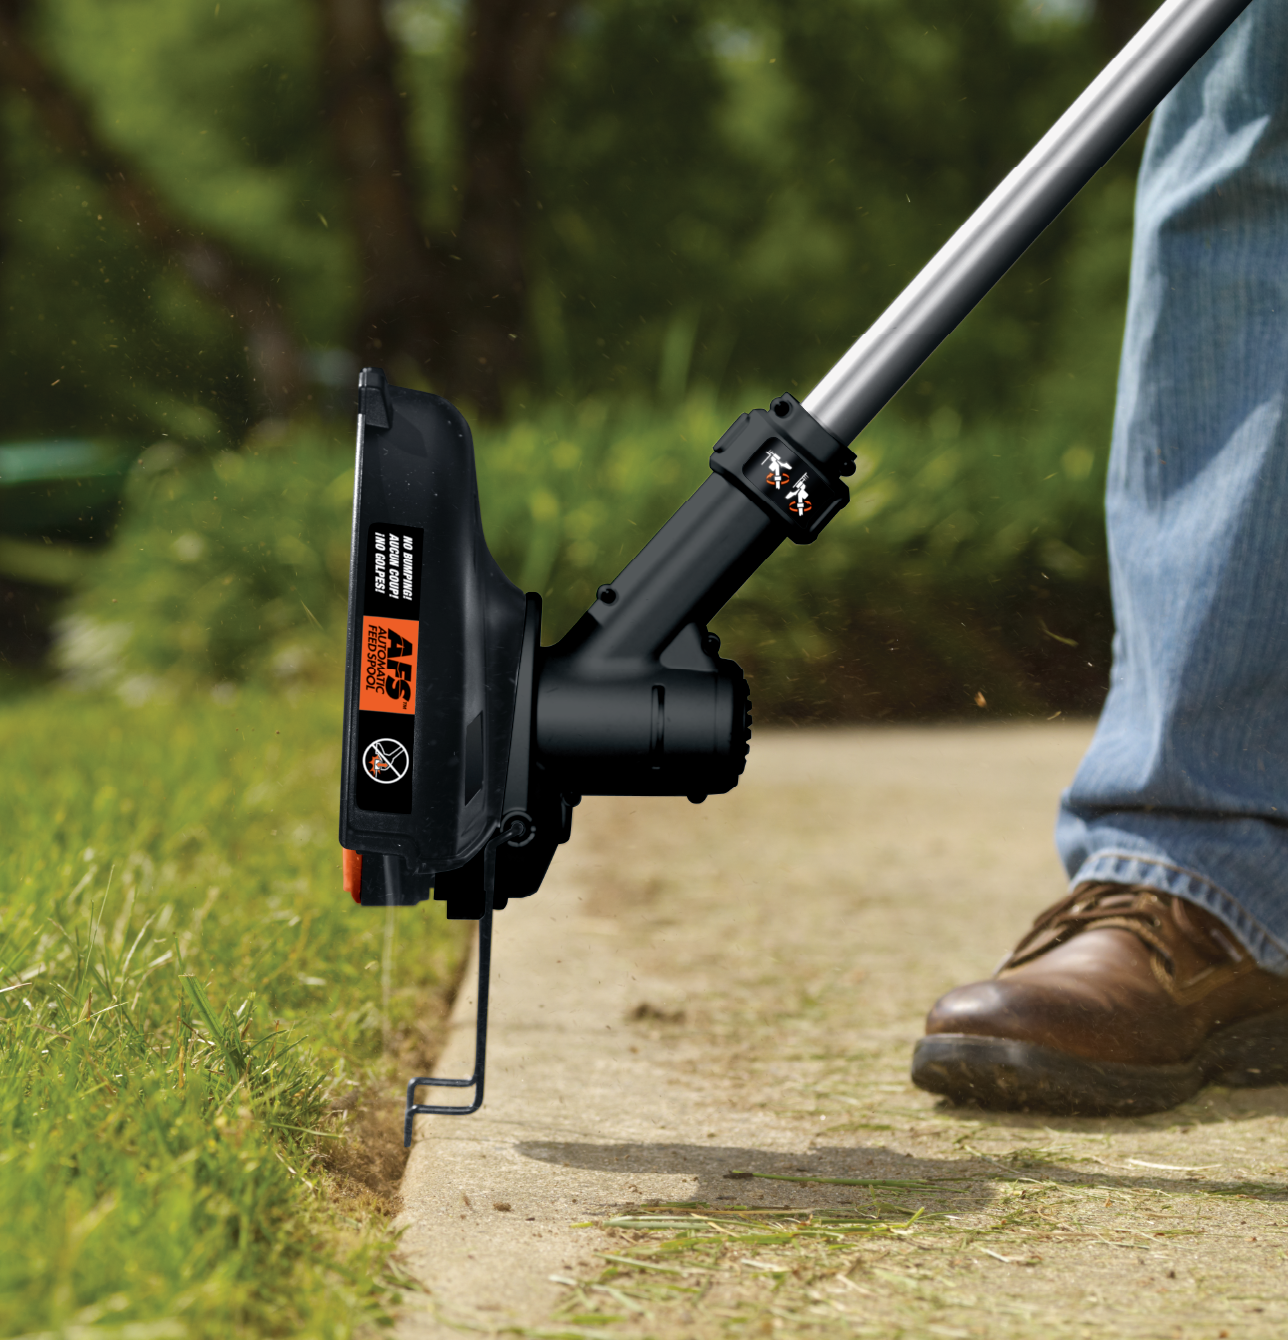 Black+Decker 40V Max String Trimmer - Battery and Charger Not Included  #LST136B (1/Pkg.)